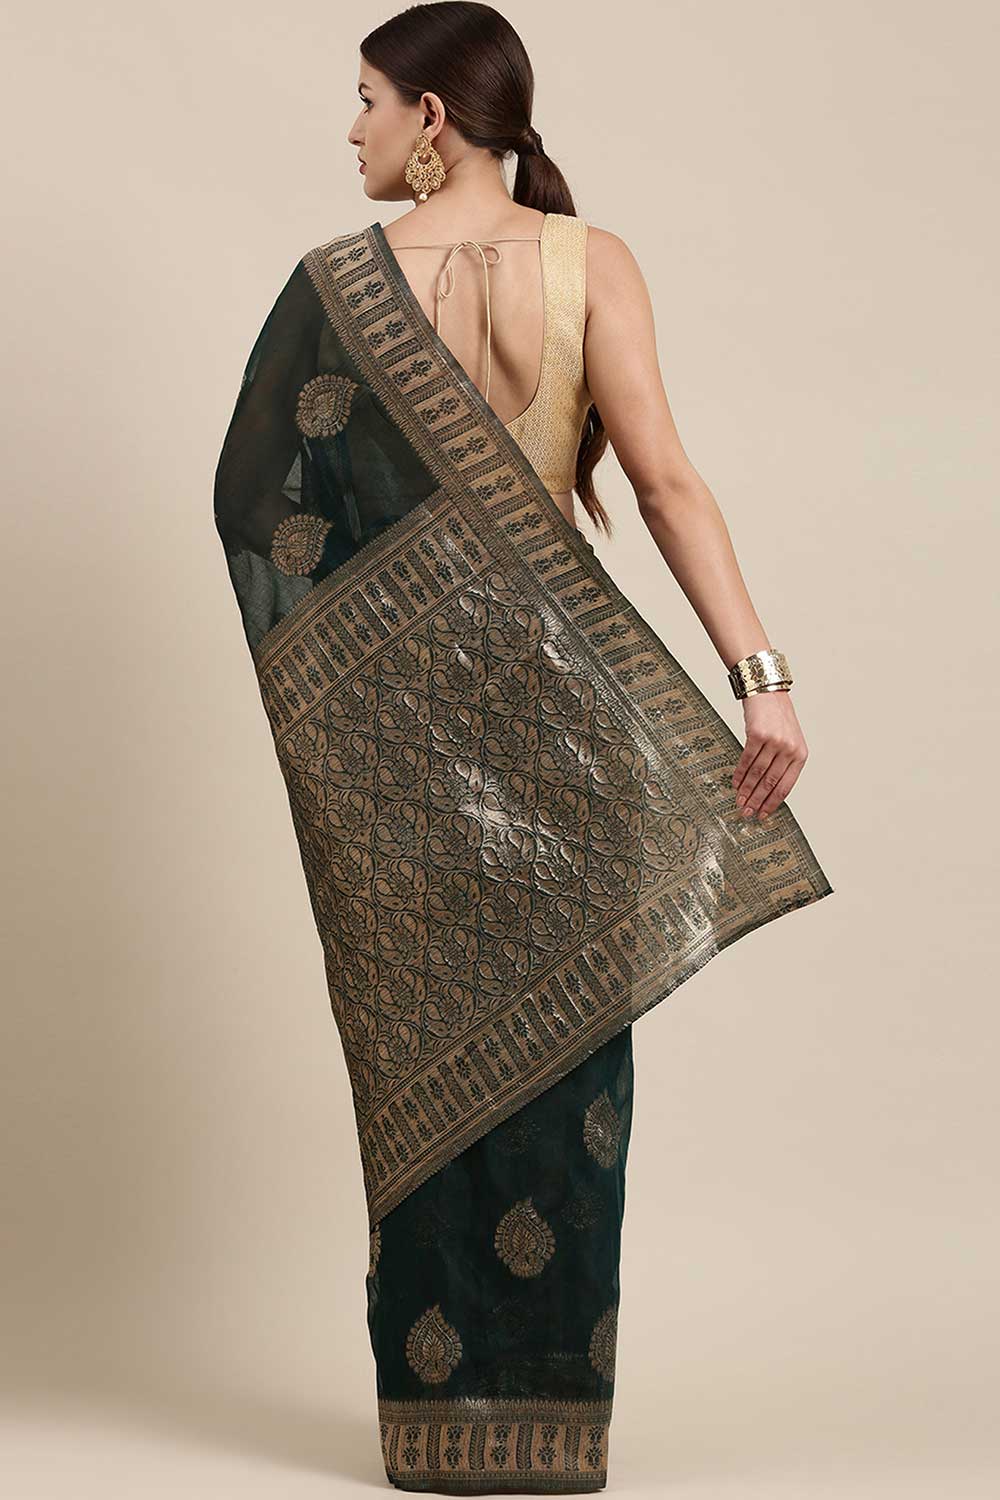 Shop Karish Green Bagh Blended Linen One Minute Saree at best offer at our  Store - One Minute Saree